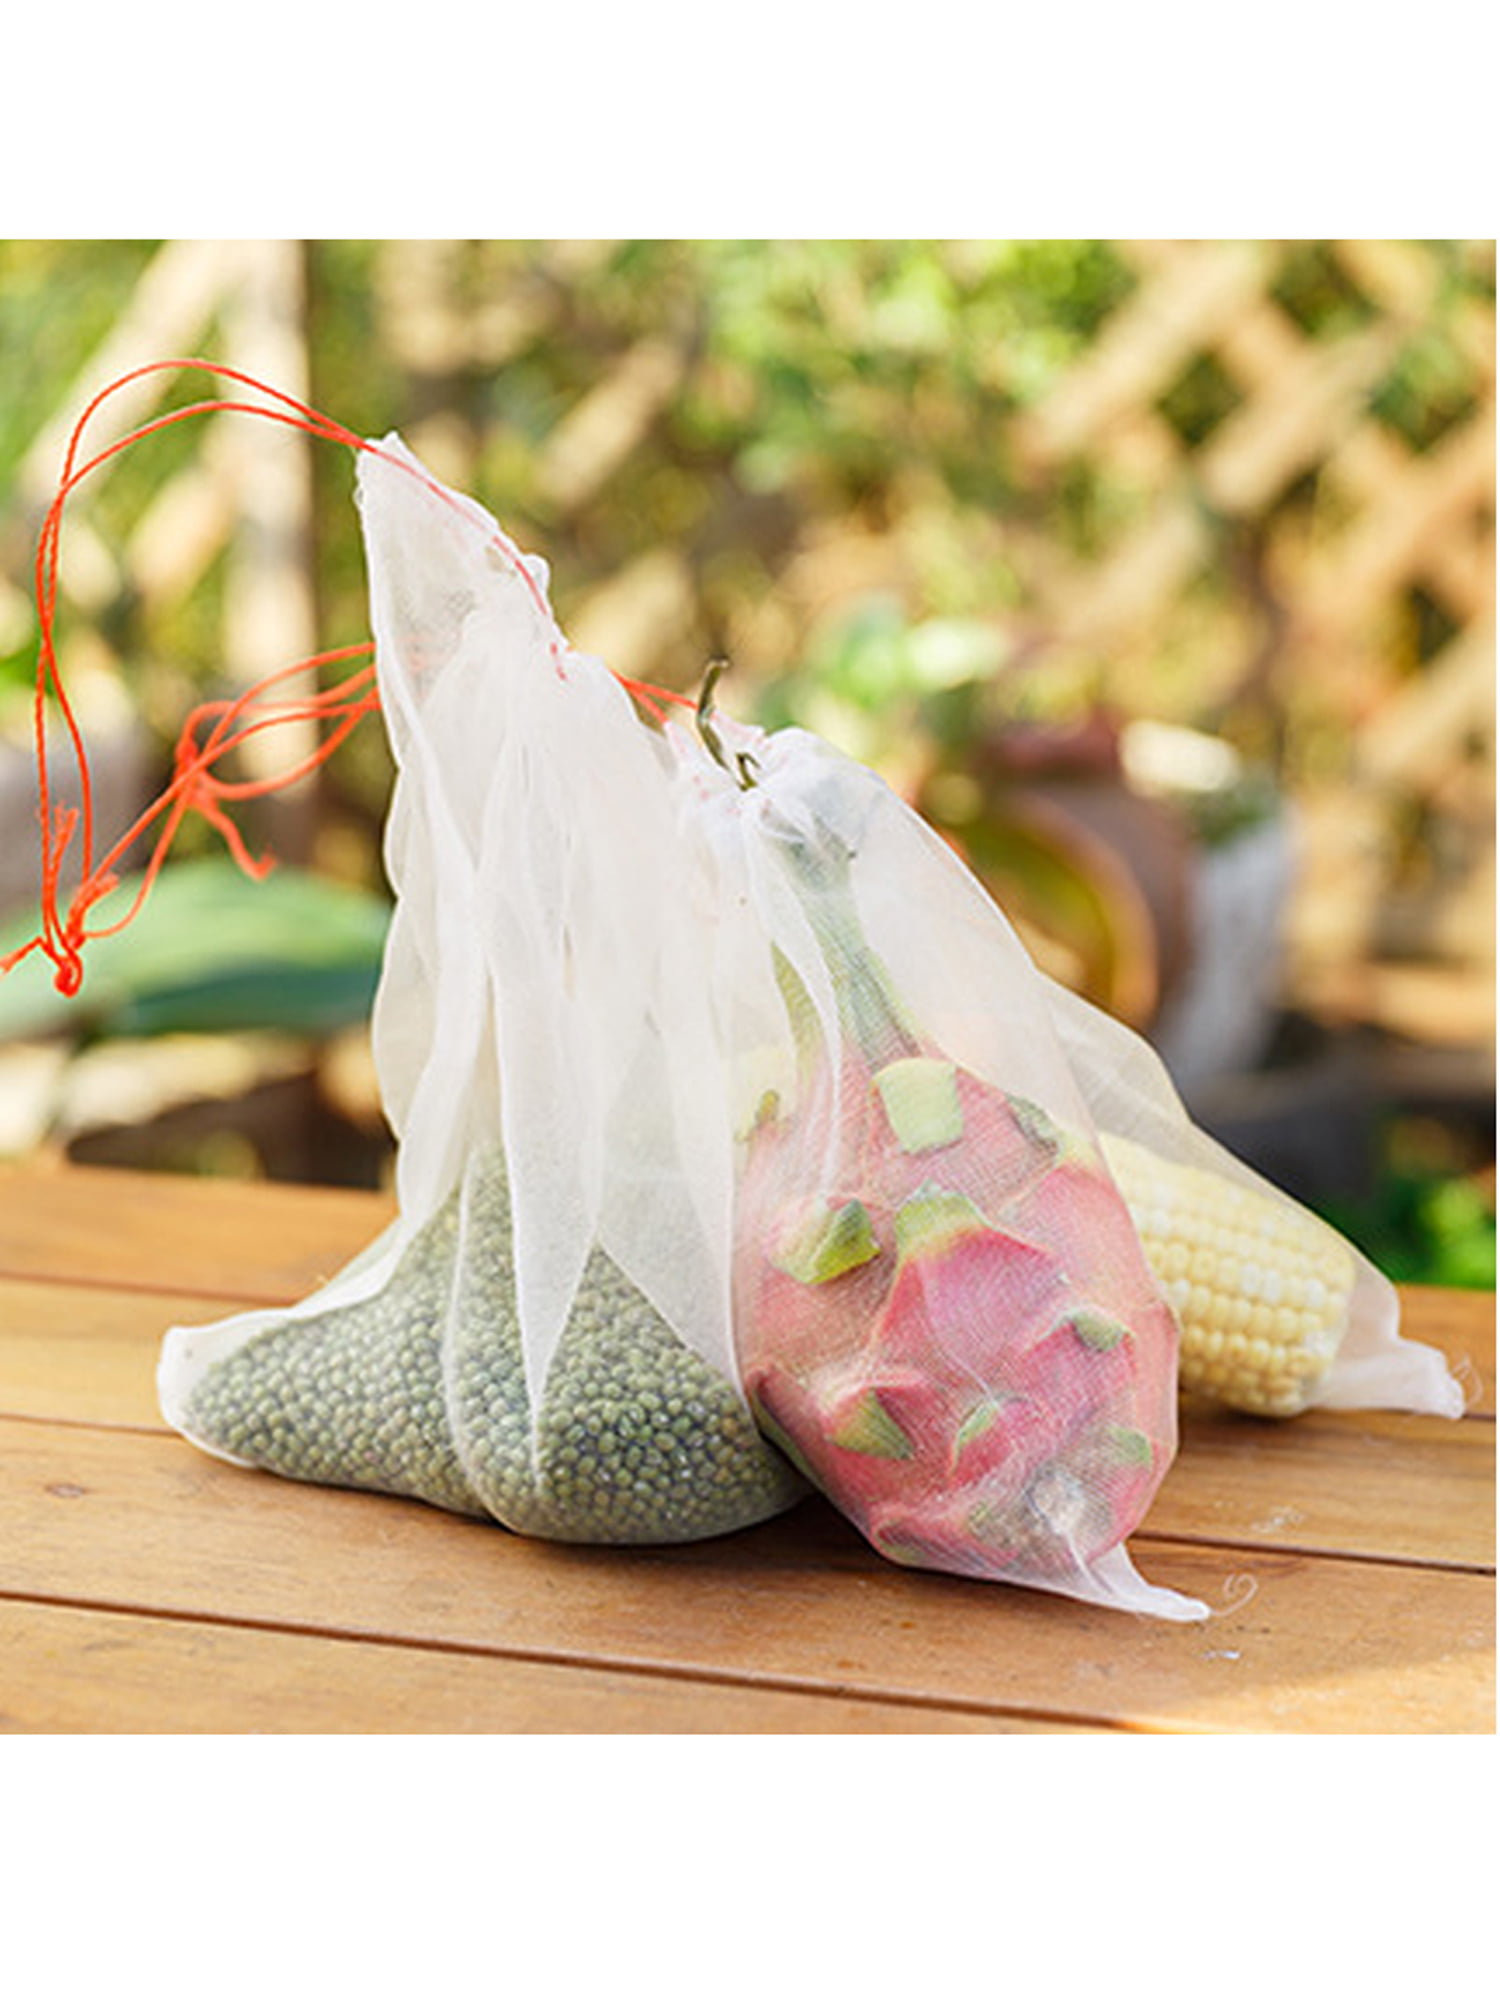 Durable Fruit Protect Drawstring Mesh Net Bag Plant Cover Anti Insect Pest Bird 